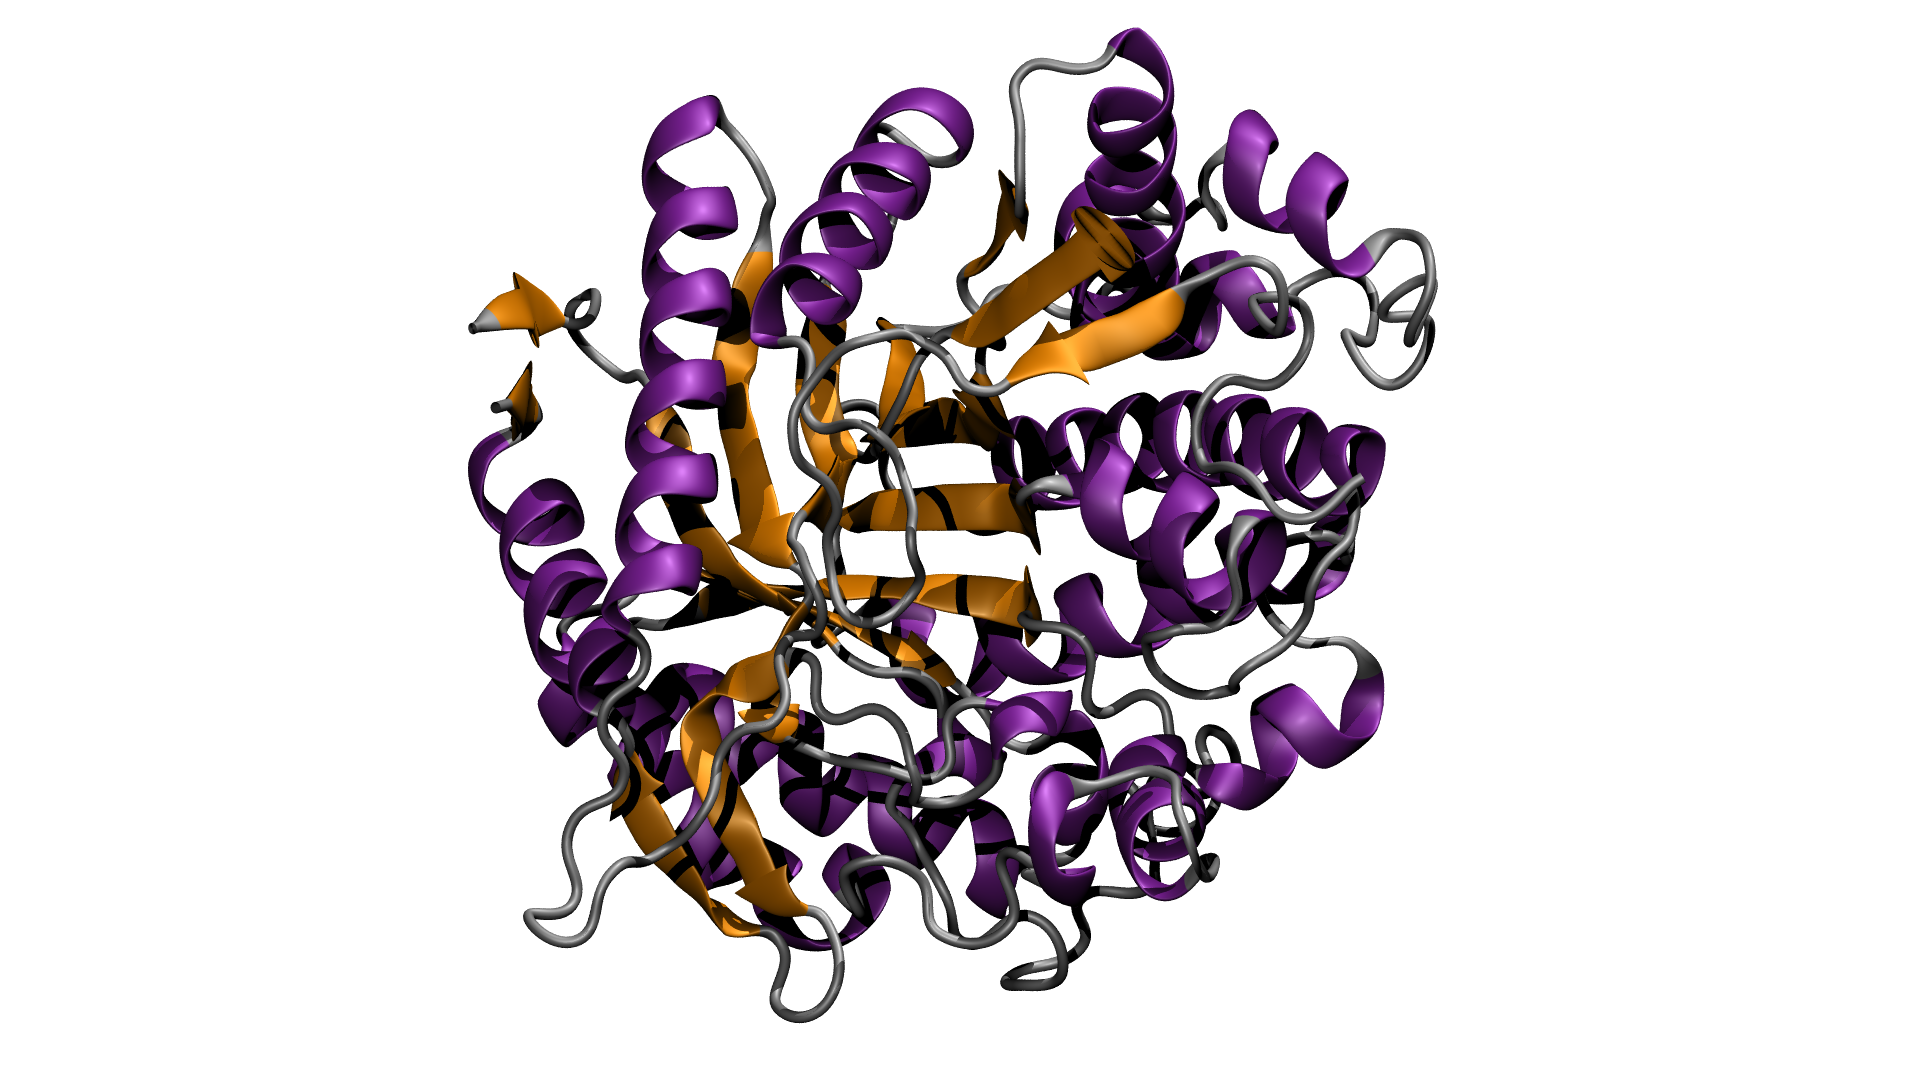 Fig. 1: A 3D rendering of the modified glucosidase enzyme